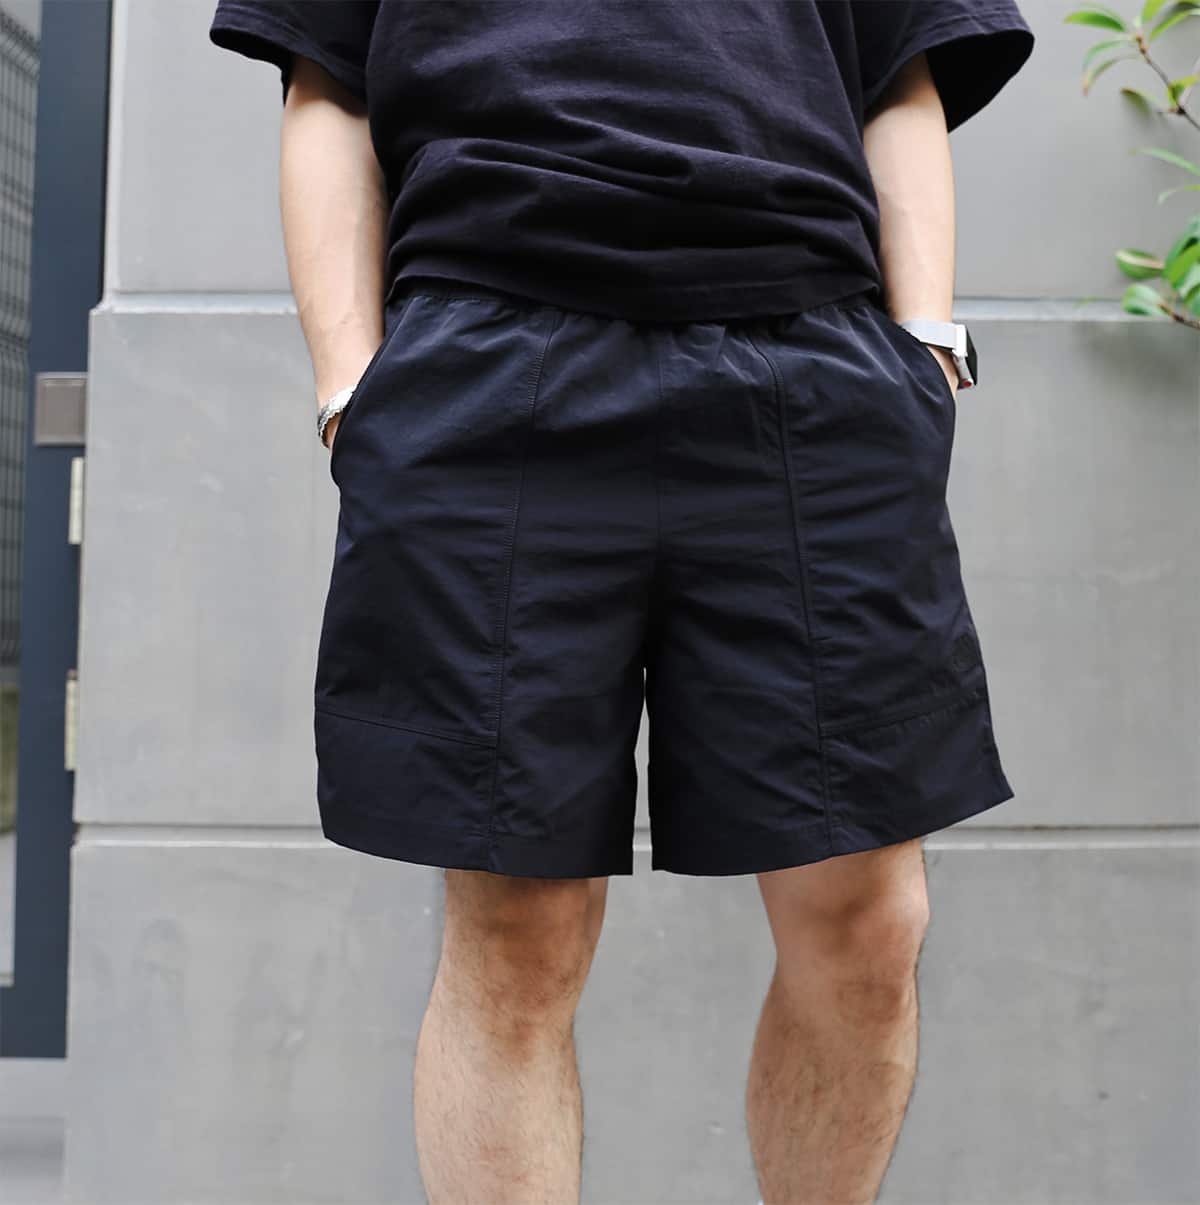 THE NORTH FACE WATER STRIDER SHORT BLACK 21SS-I